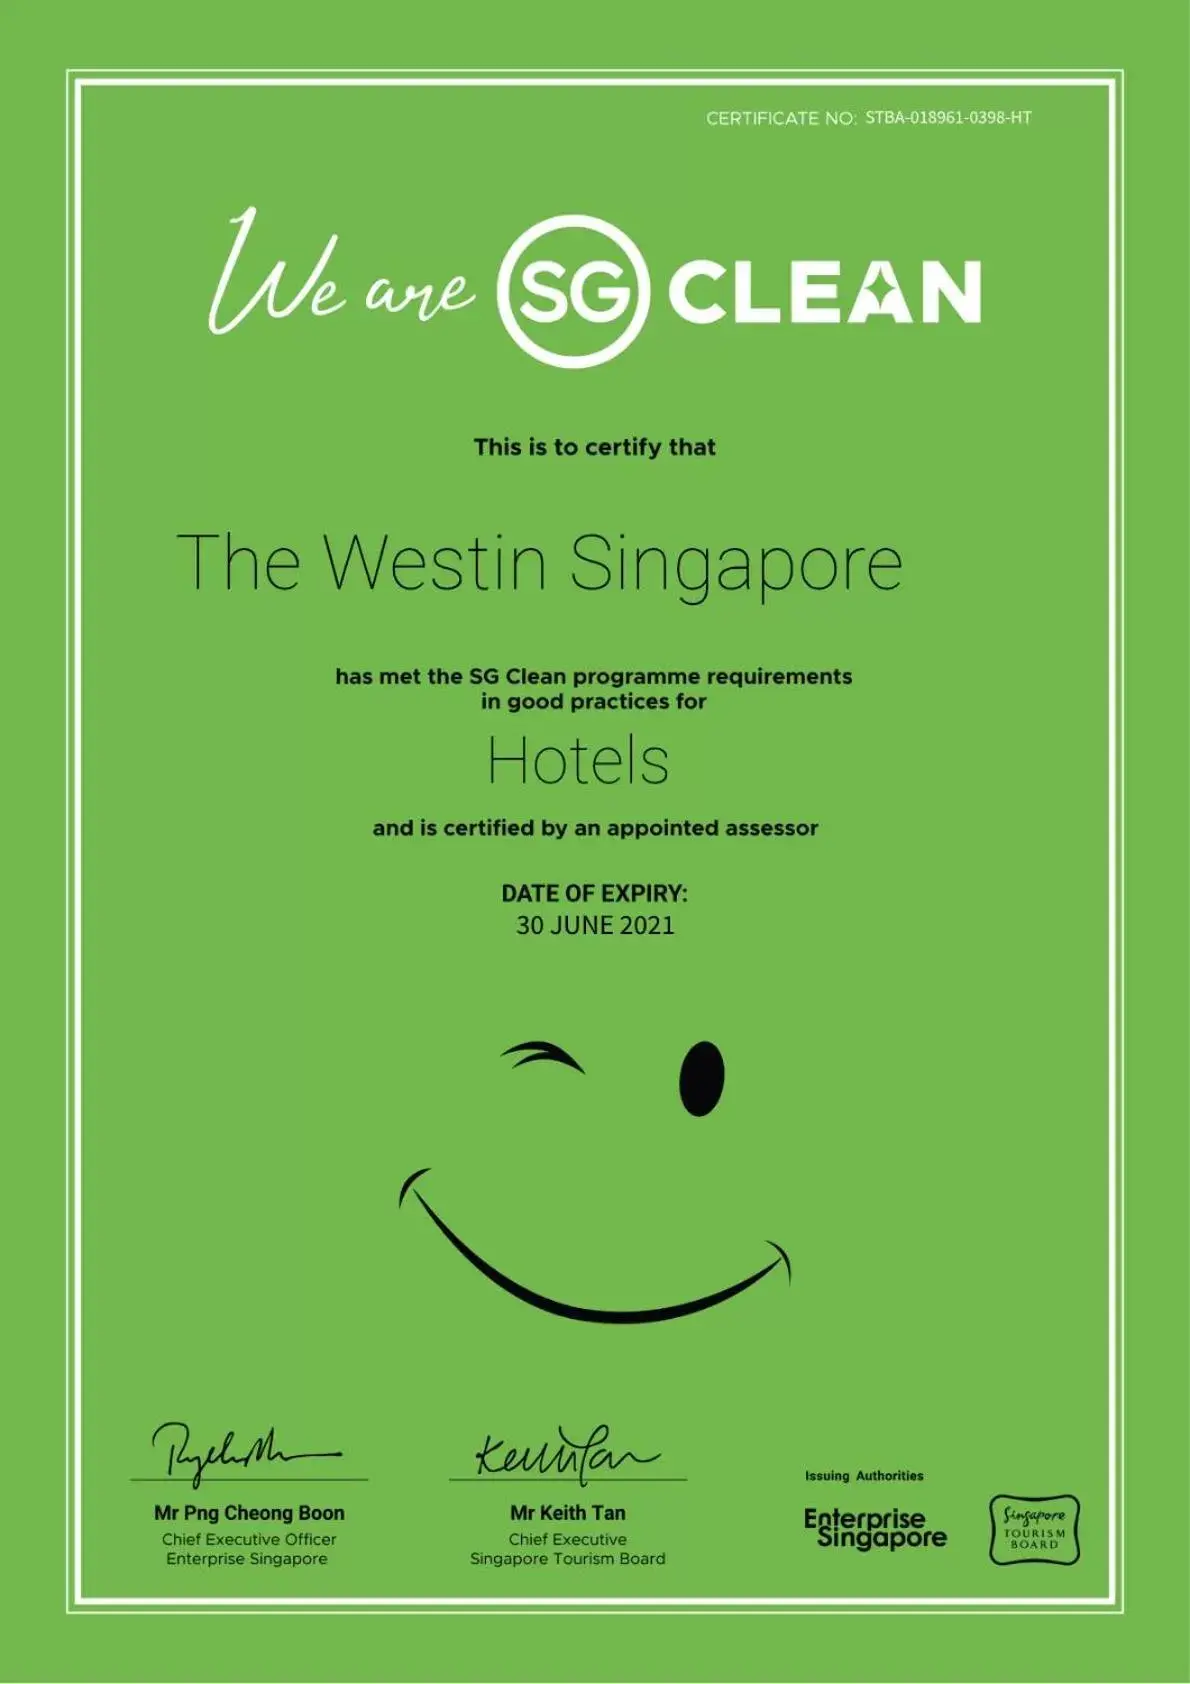 Logo/Certificate/Sign in The Westin Singapore